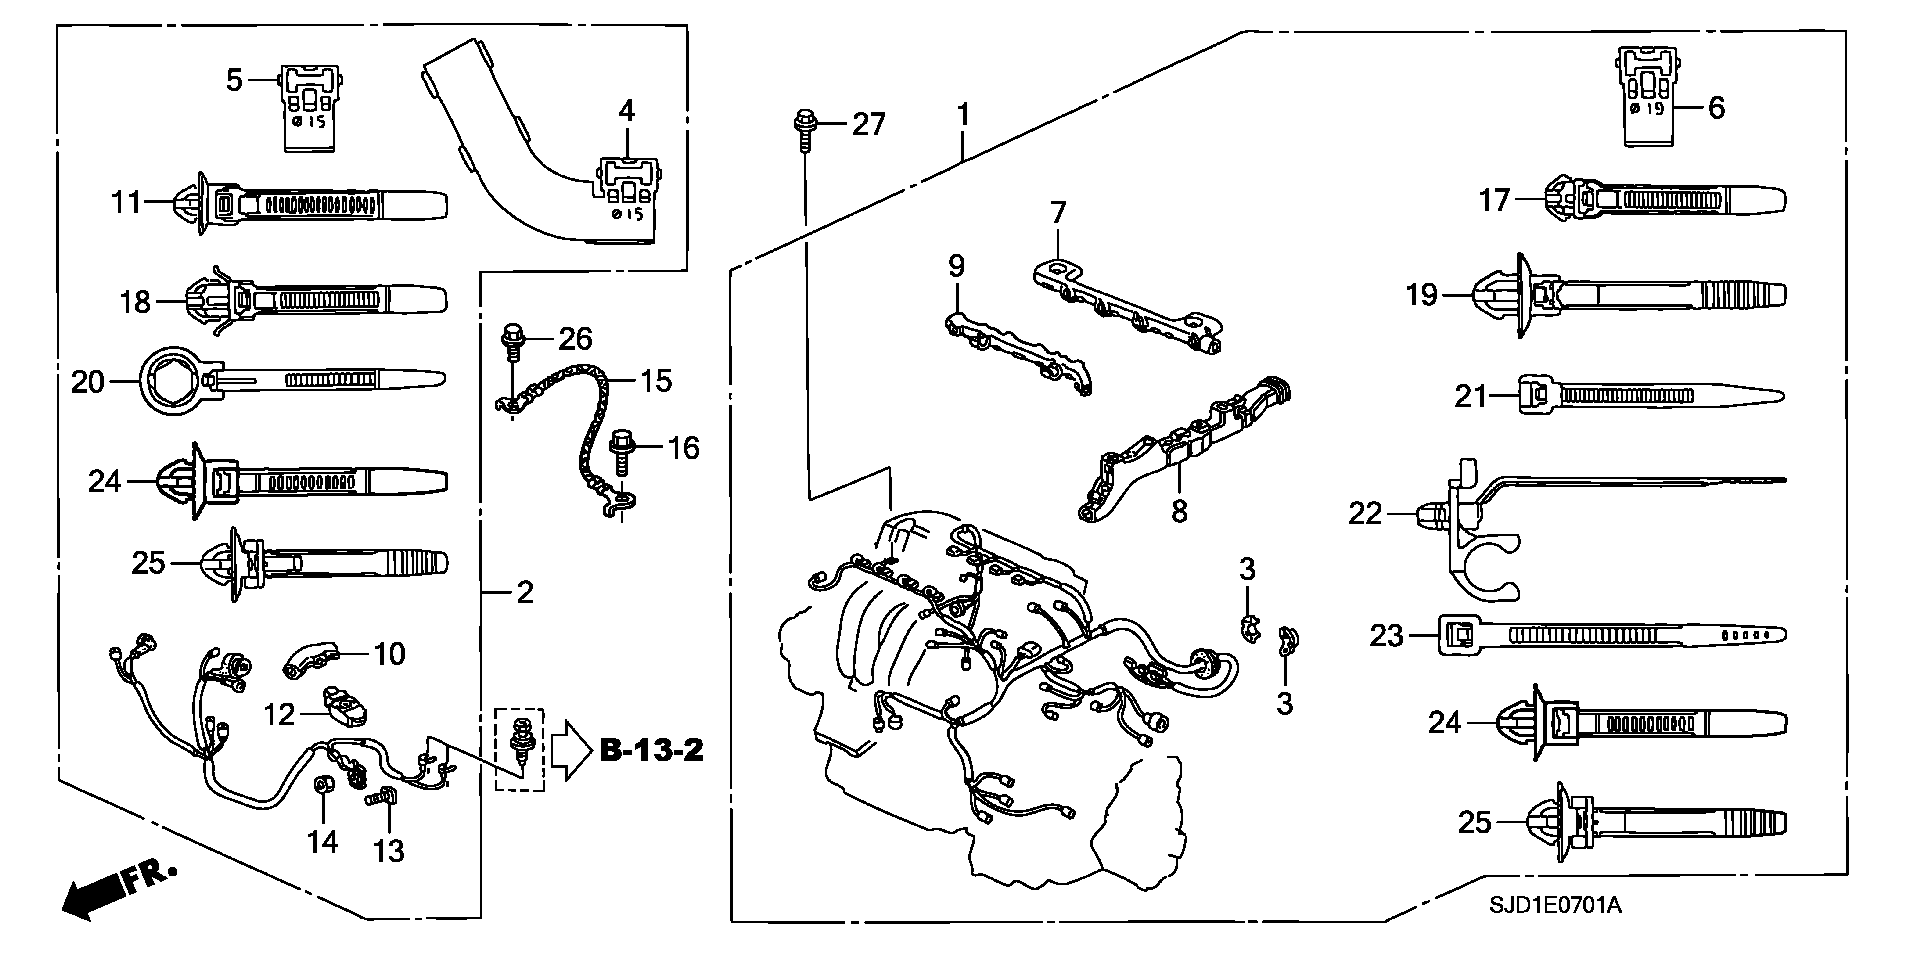 ENGINE WIRE HARNESS (2.0L)